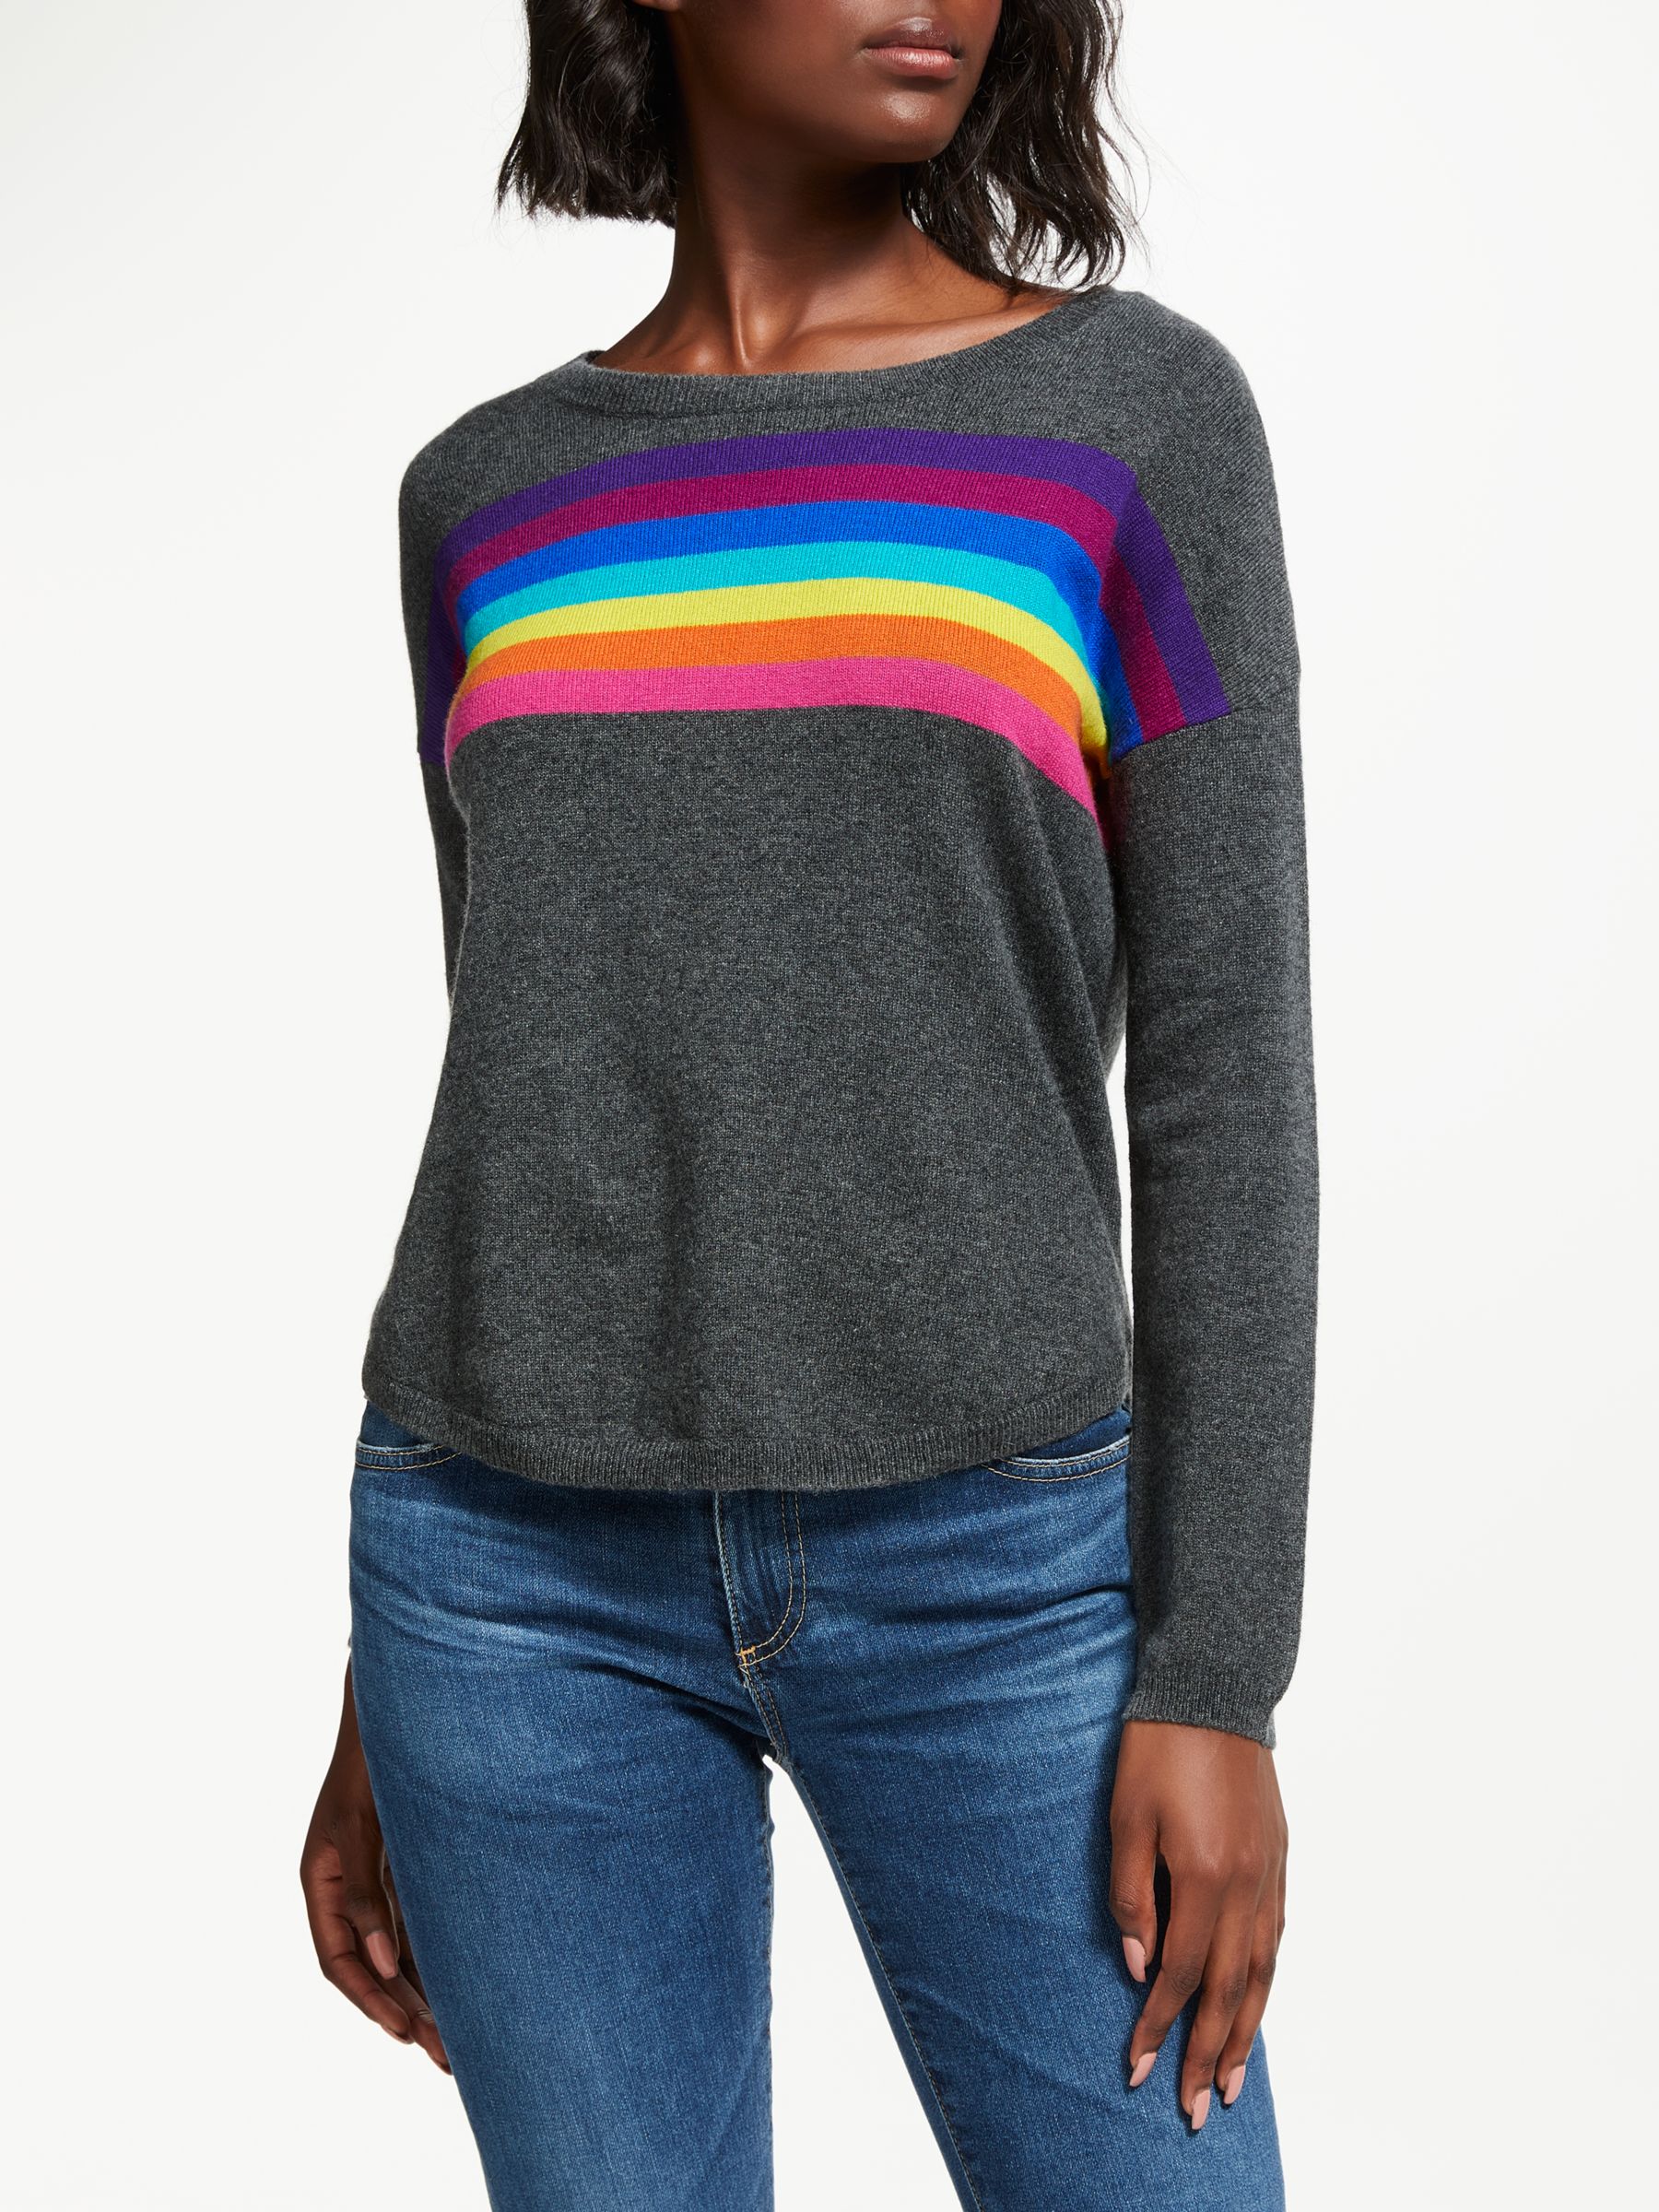 Wyse London Ines Slouchy Rainbow Cashmere Jumper, Charcoal